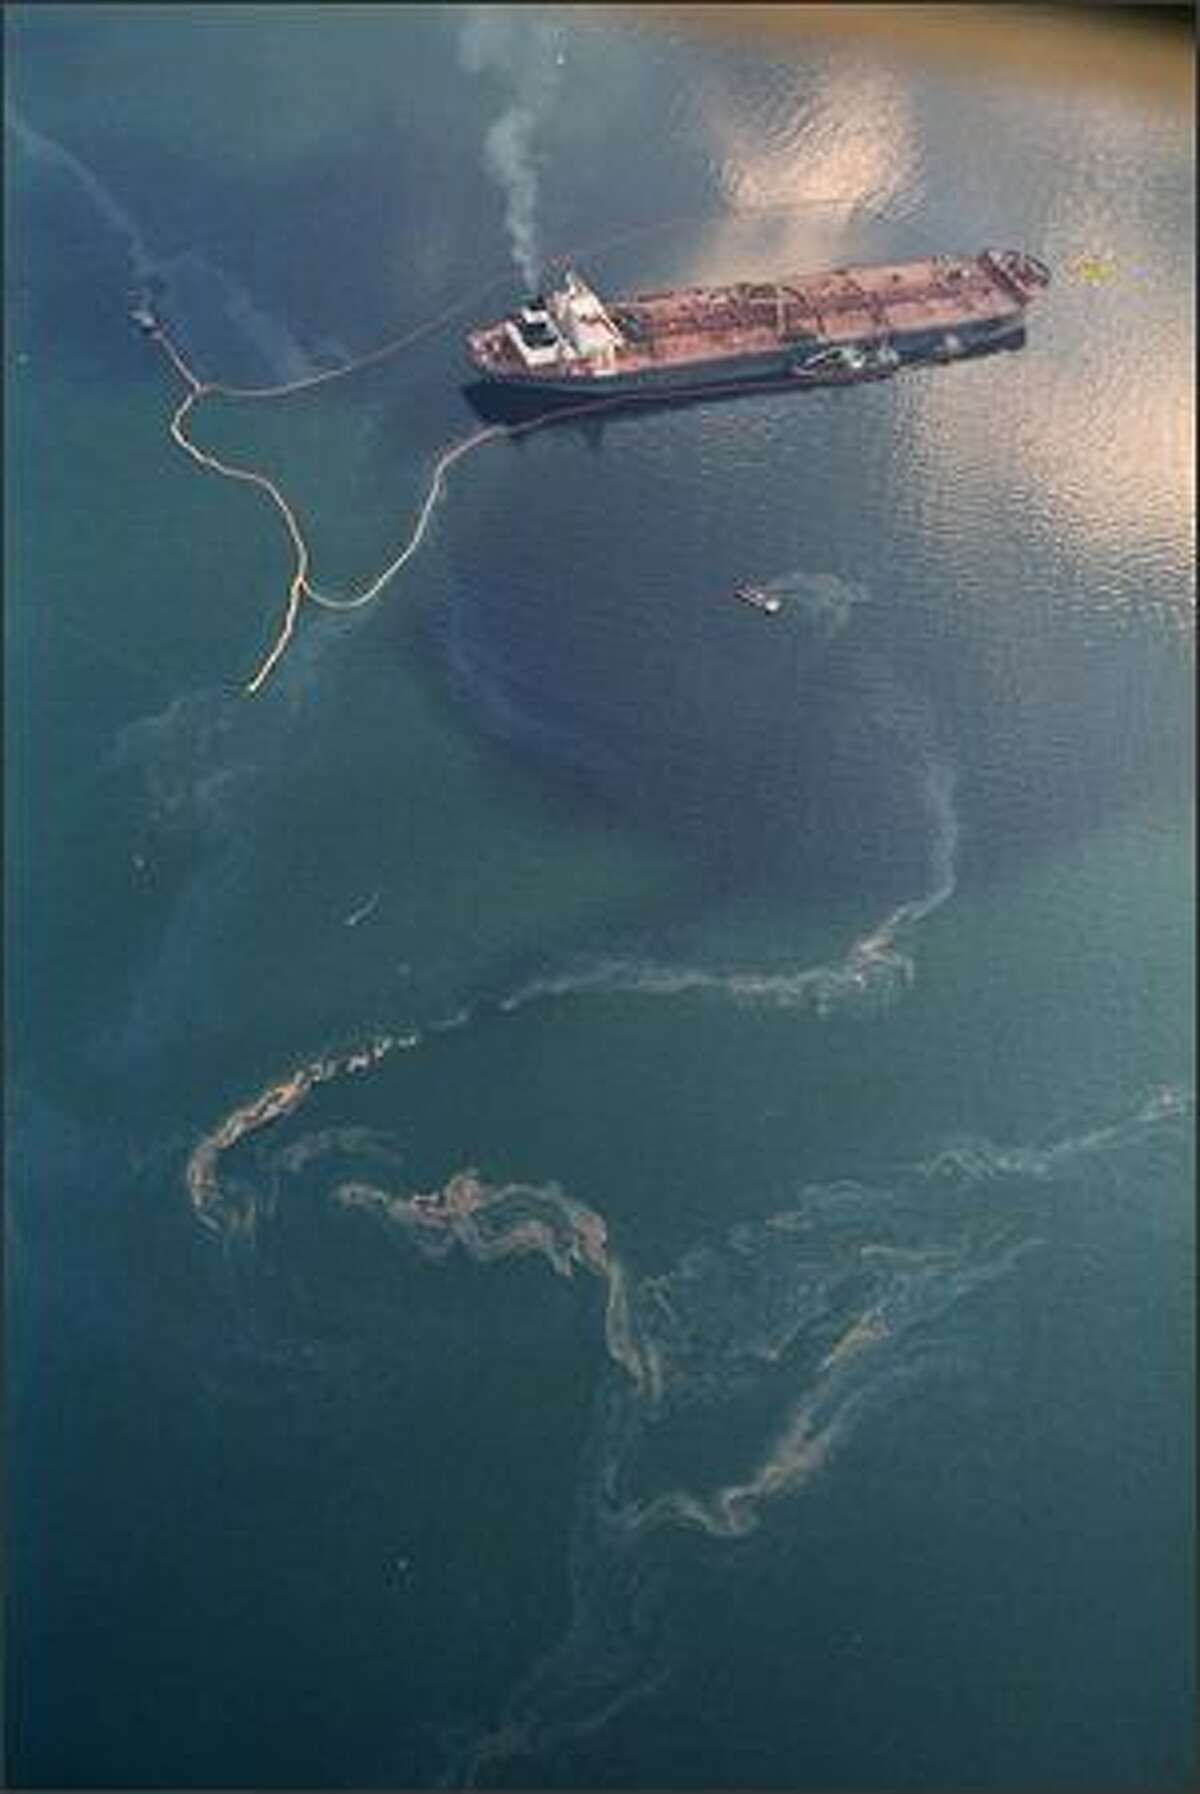 Crude oil from the tanker Exxon Valdez swirls on the surface of Alaska's Prince William Sound near Naked Island Saturday, April 9, 1989, 16 days after the tanker ran aground, spilling millions of gallons of oil and causing widespread environmental damage.